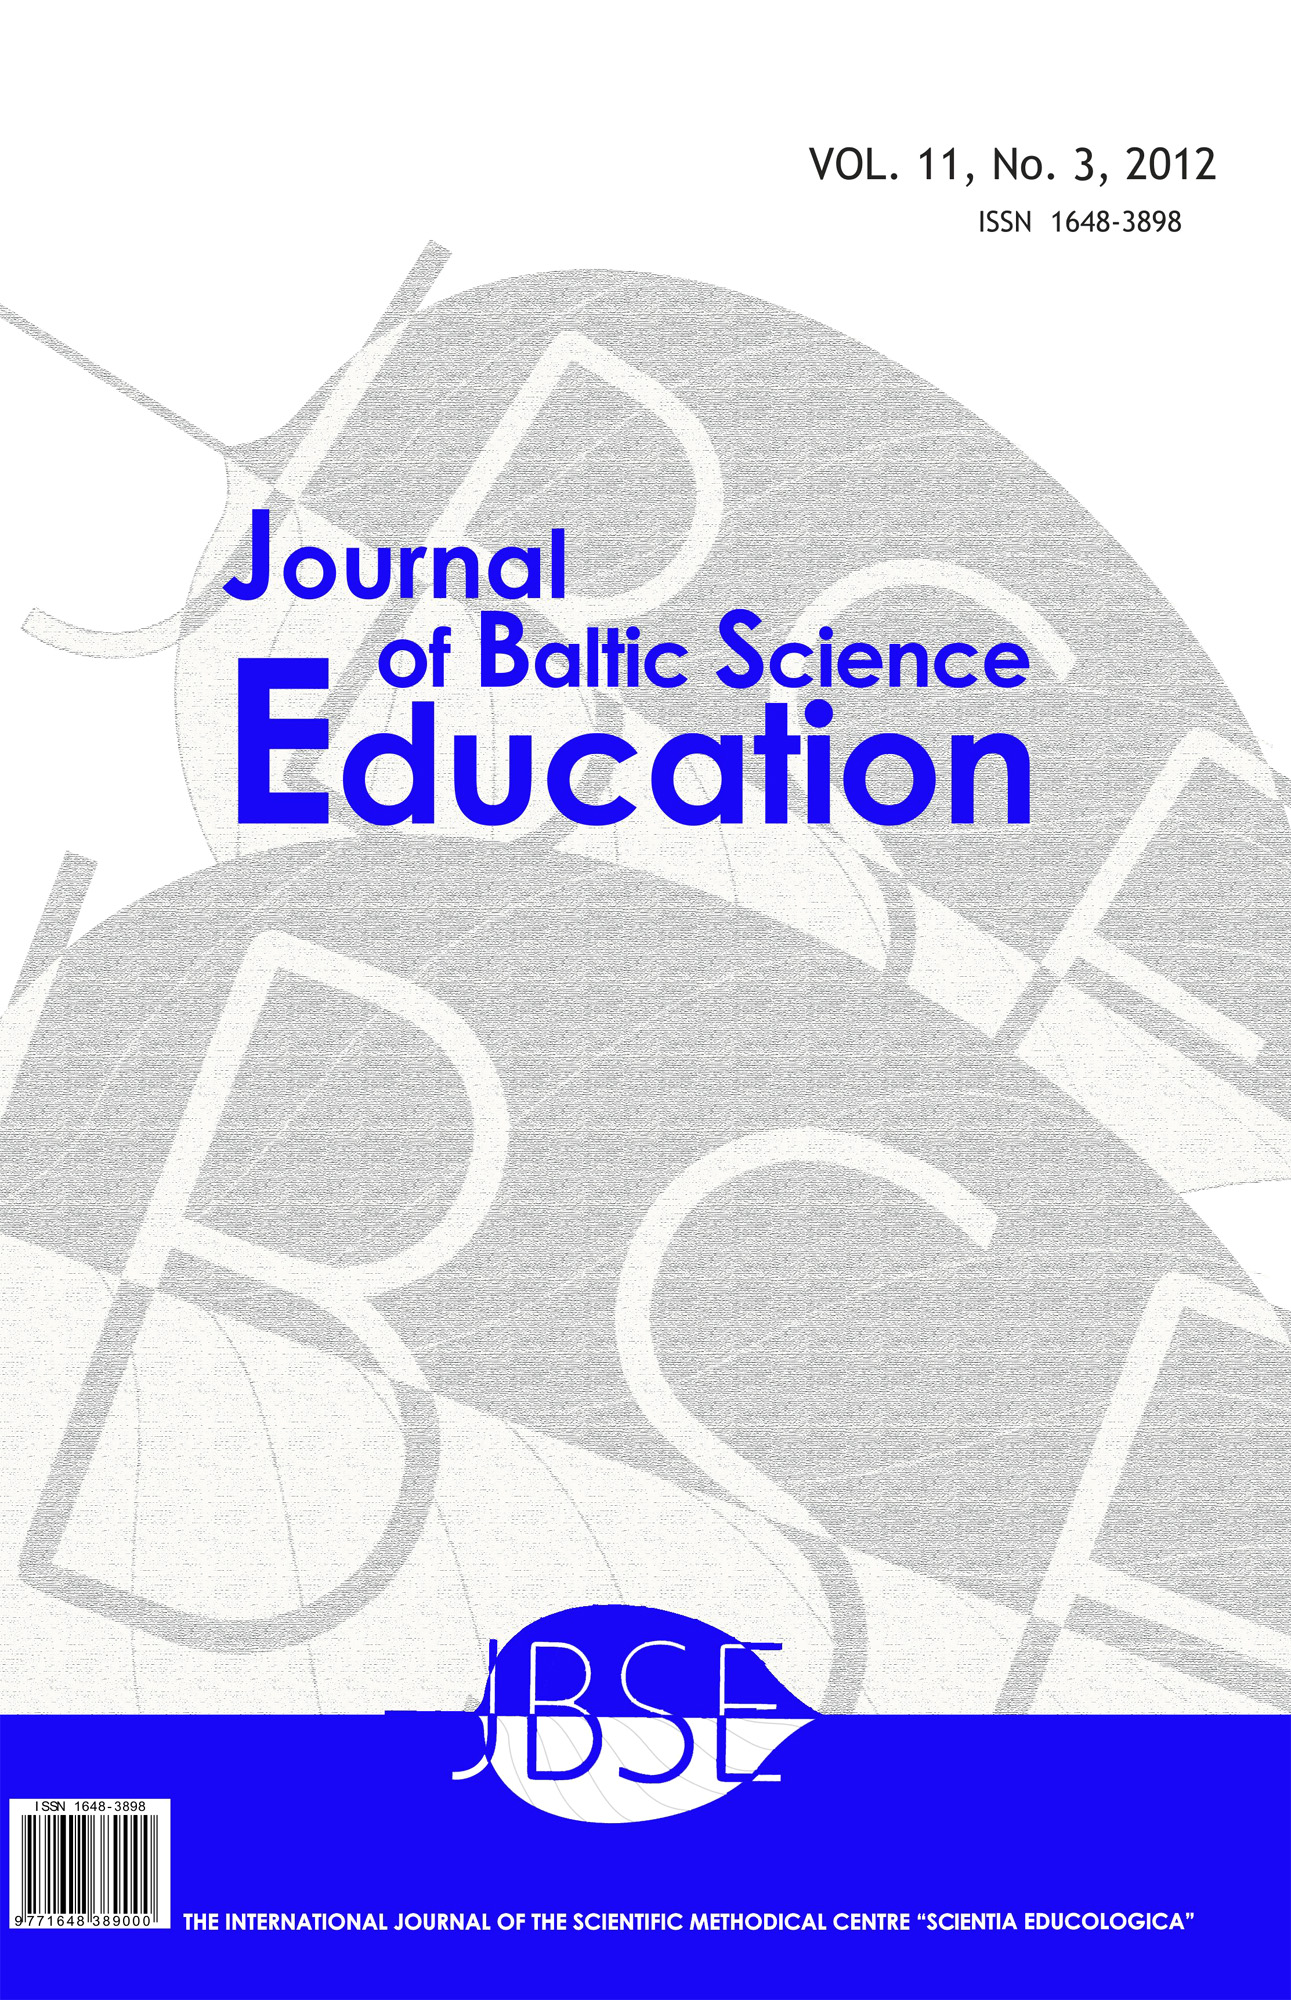 A STUDY ON DEVELOPING A BEHAVIOUR SCALE TOWARDS SUSTAINABLE ENVIRONMENTAL EDUCATION